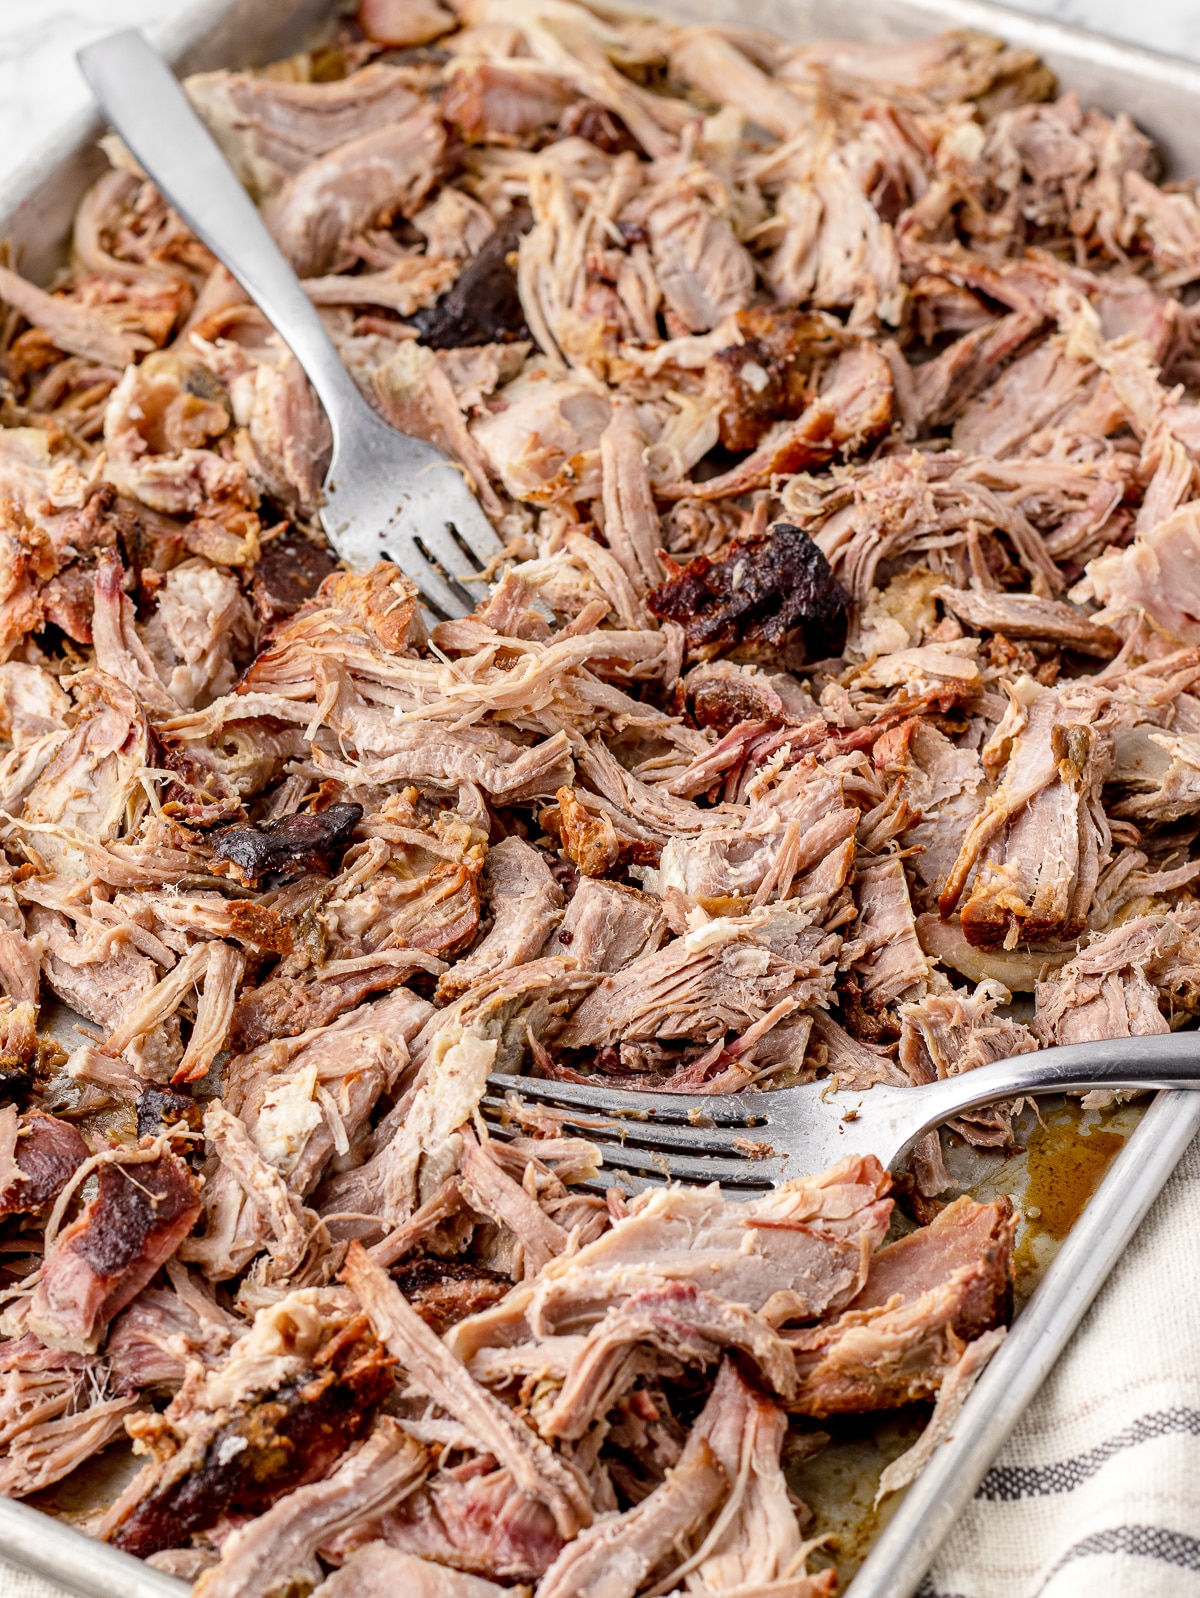 Shredded and pulled smoked pork butt on a pan with two forks.